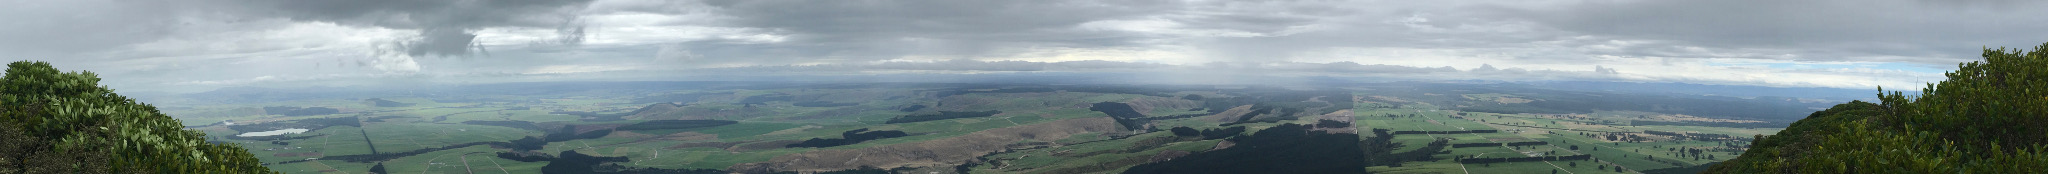 The view From Mt Tauhara, Lake Taupo is in the distance